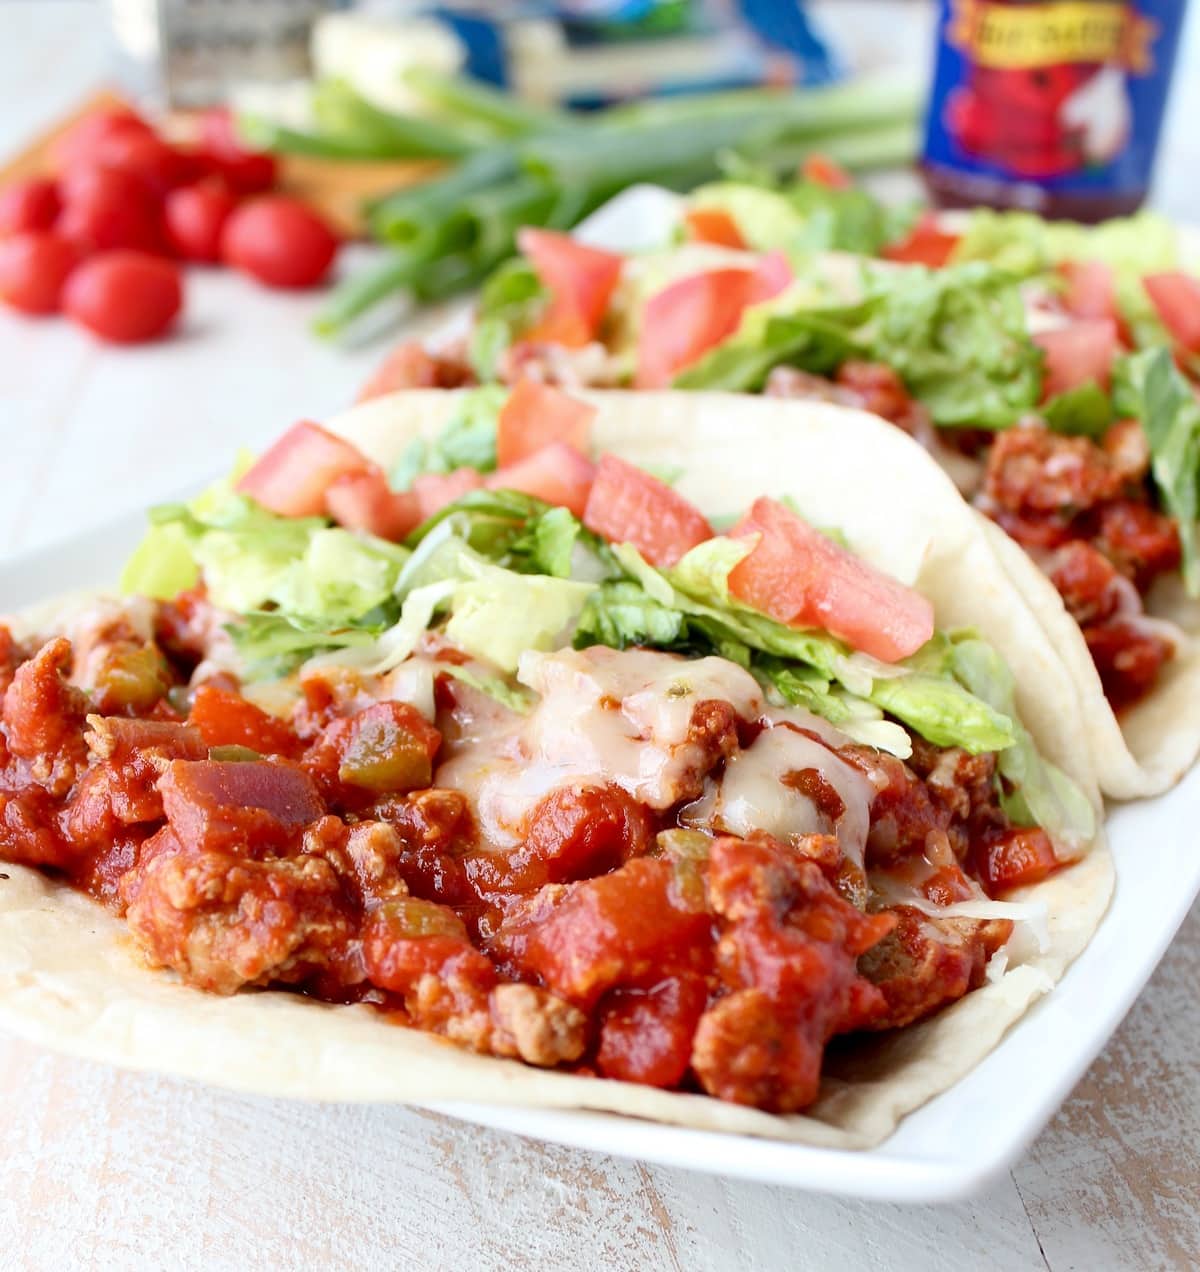 A flour tortilla topped with ground turkey, salsa, cheese, lettuce, and tomato.